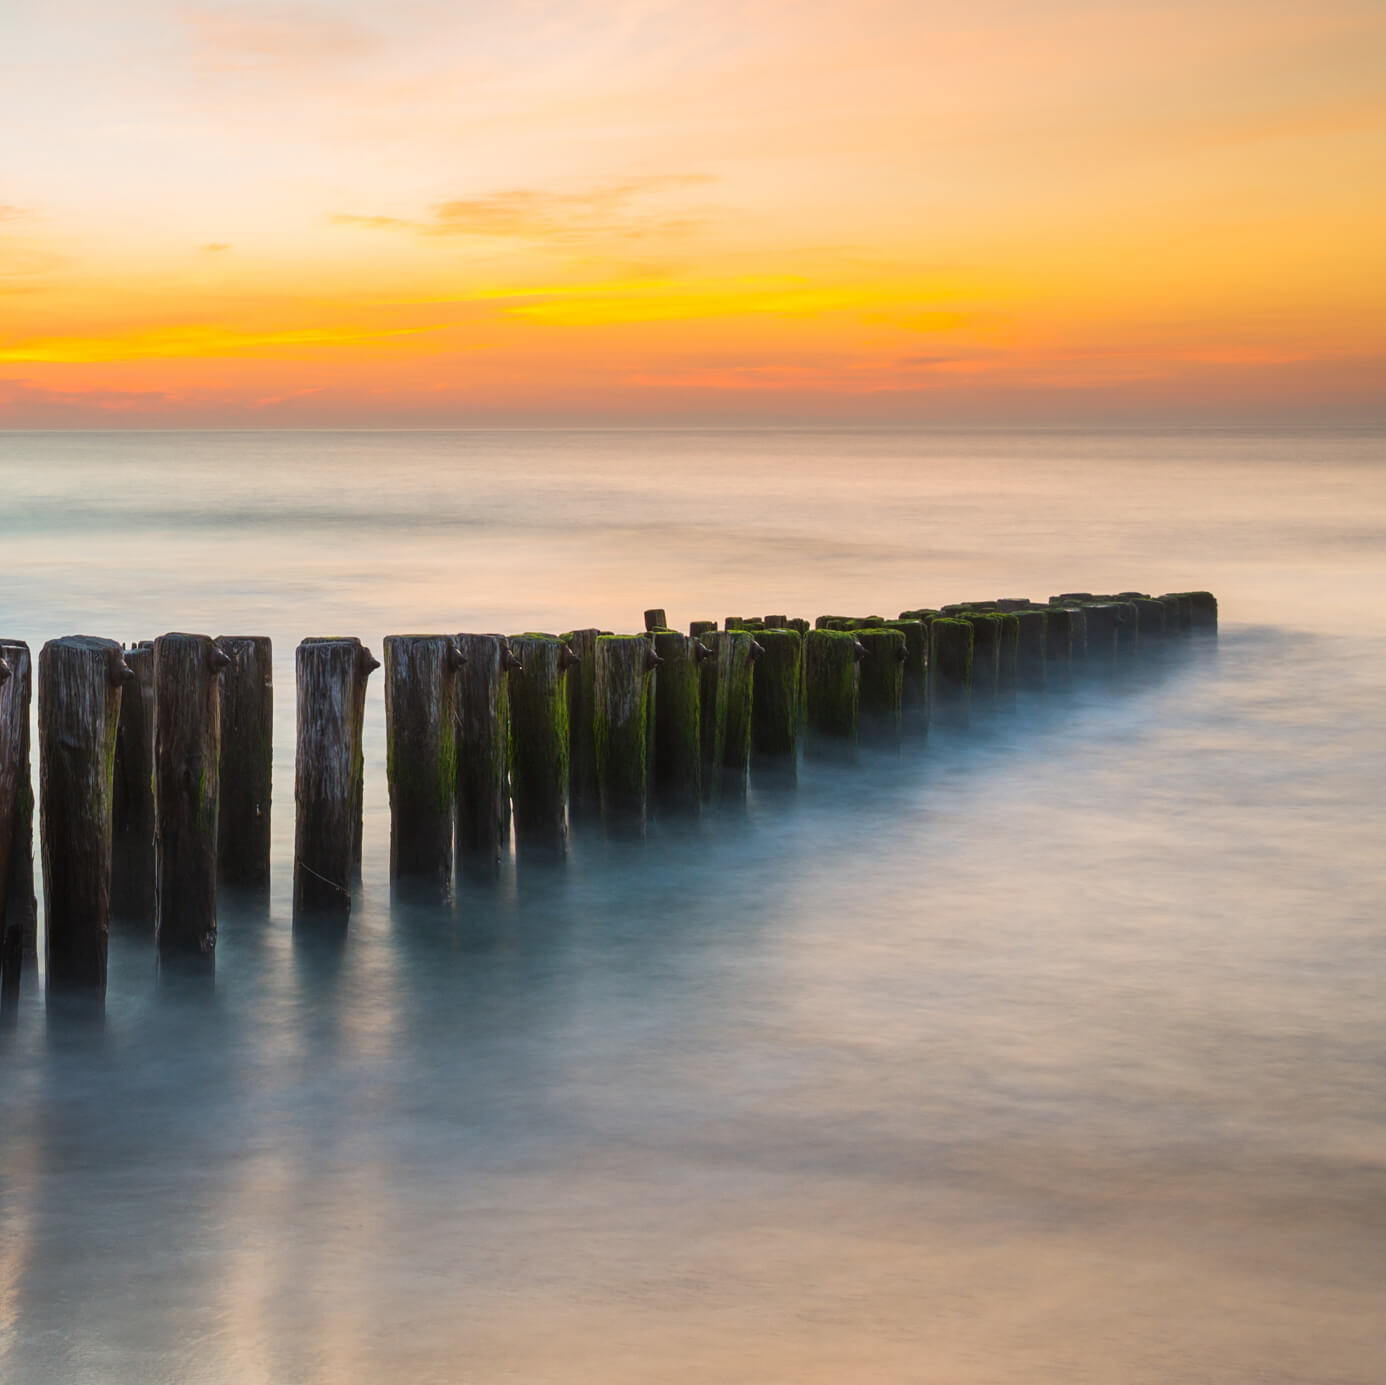 Wooden pilings on the shoreline at sunset.